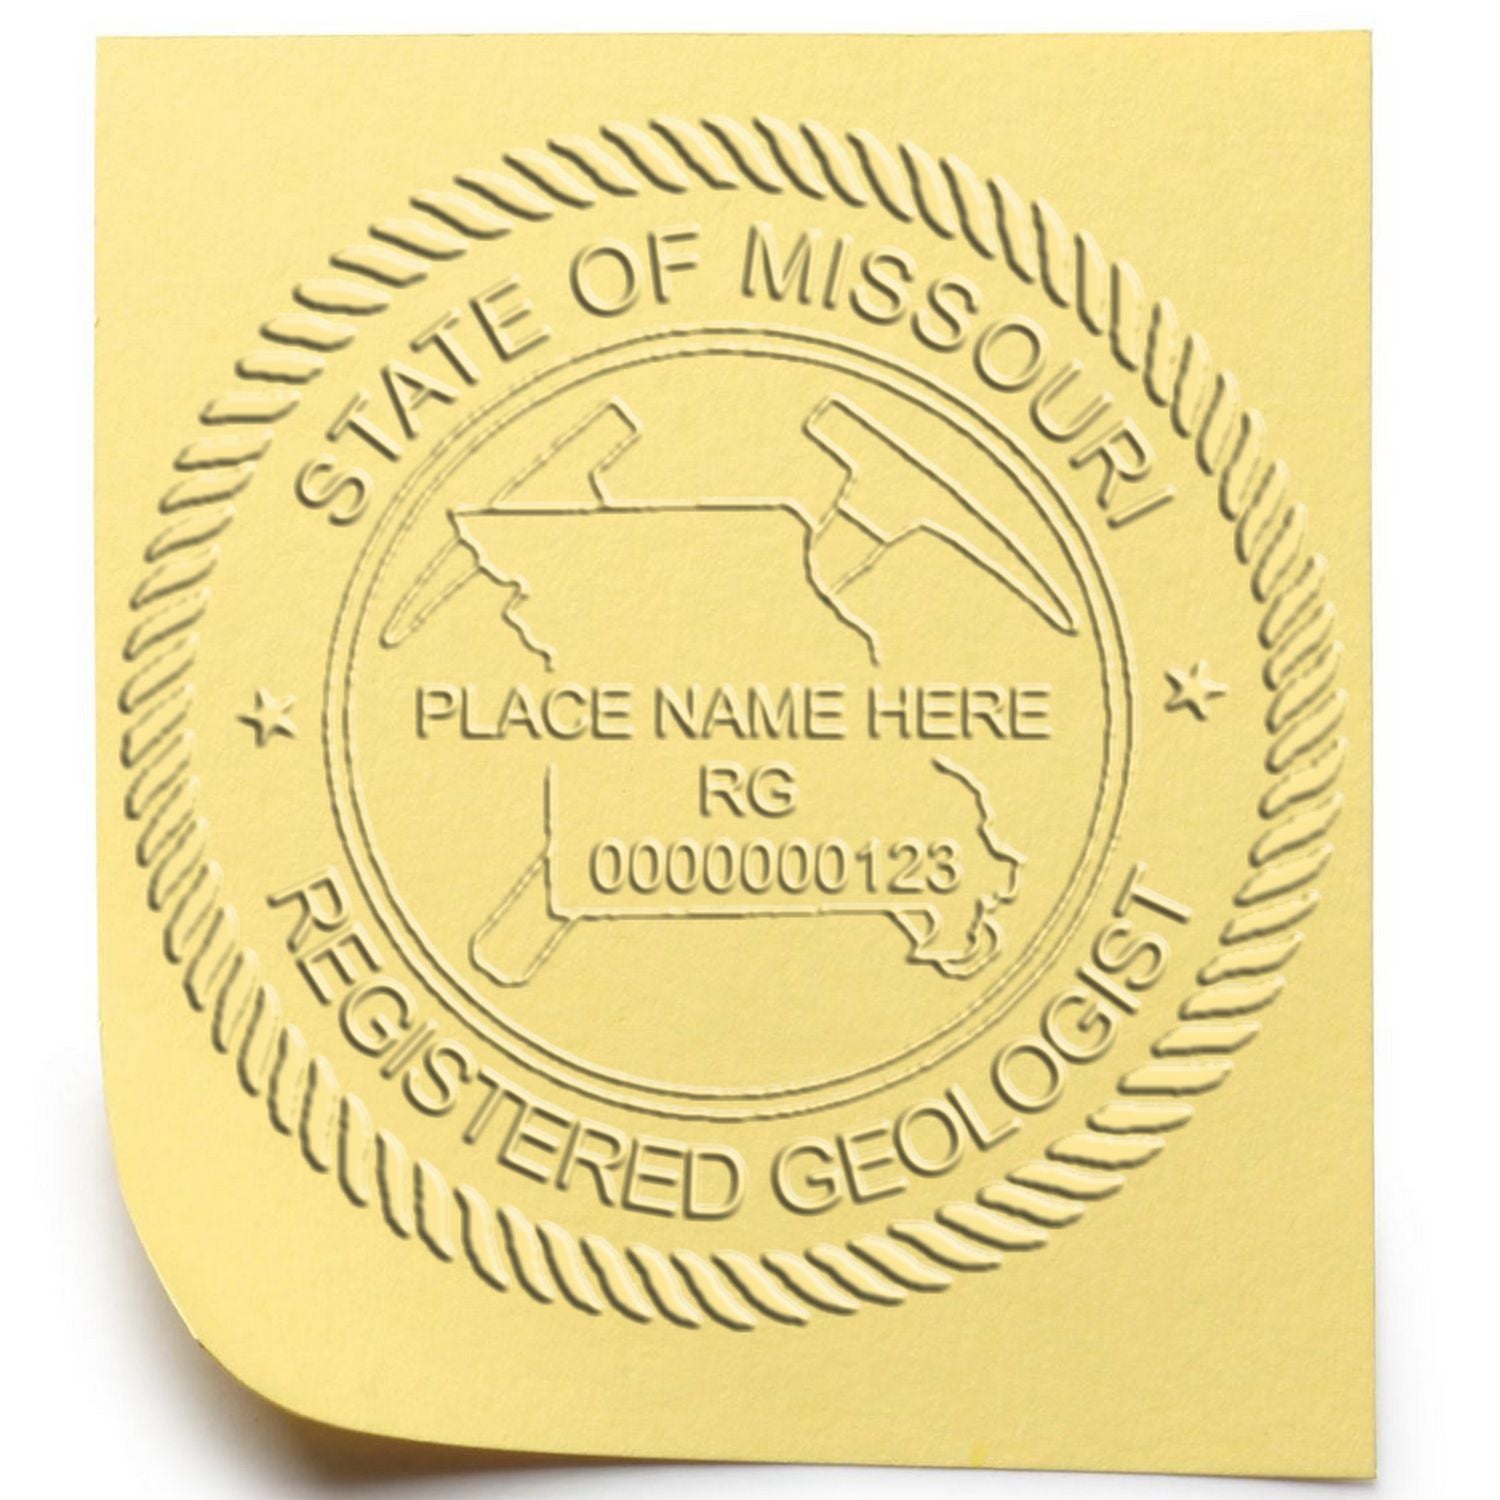 The main image for the State of Missouri Extended Long Reach Geologist Seal depicting a sample of the imprint and imprint sample